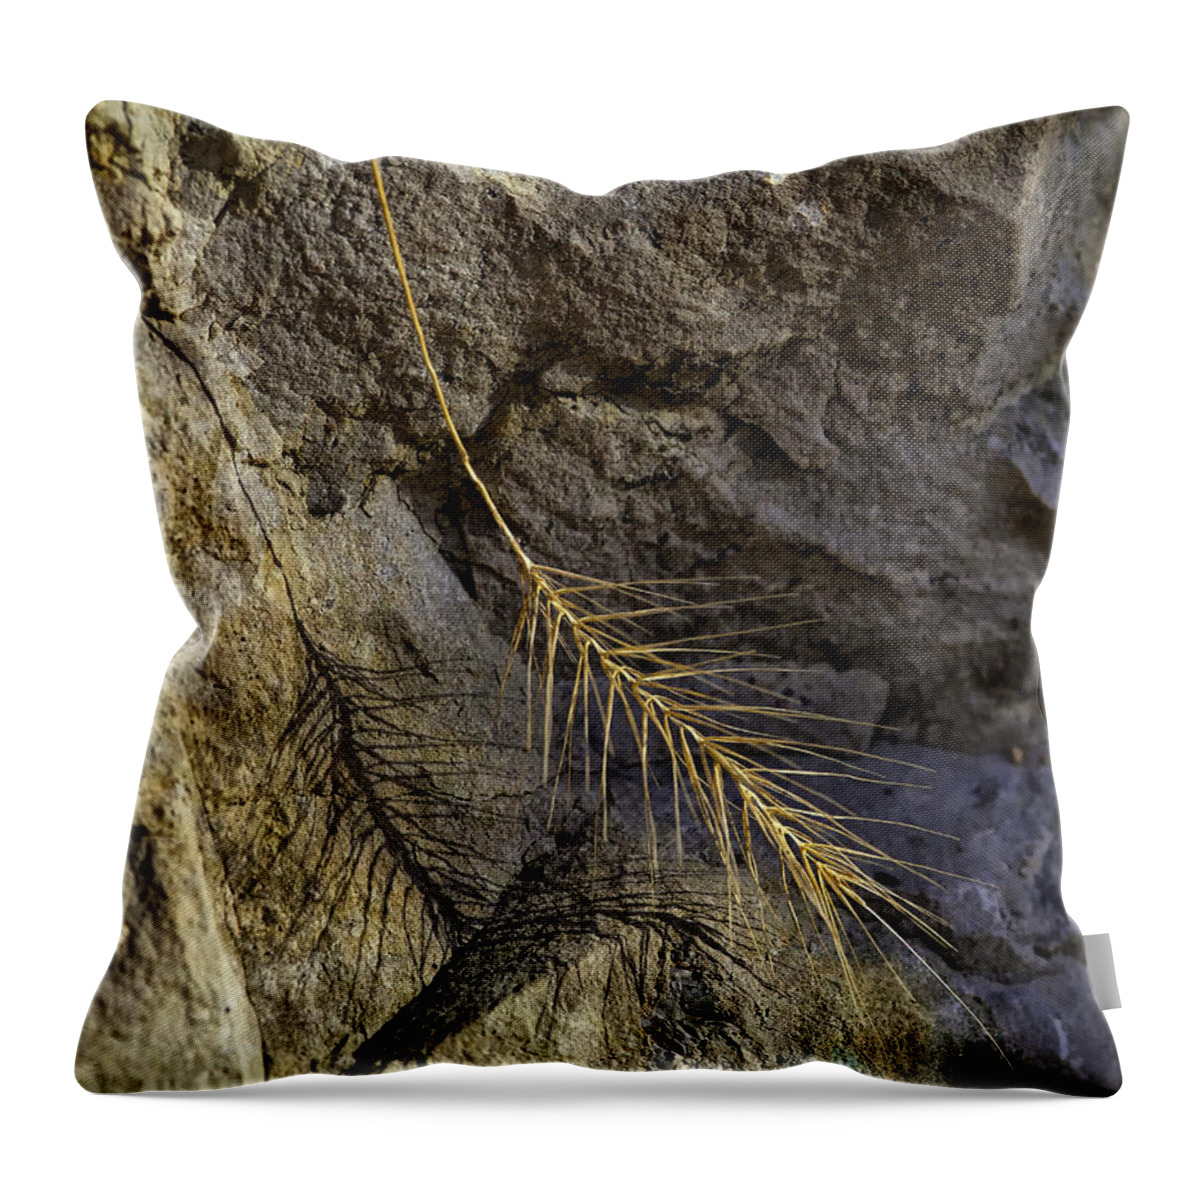 Grass Throw Pillow featuring the photograph Grass and Shadow on River Rock by Michael Dougherty